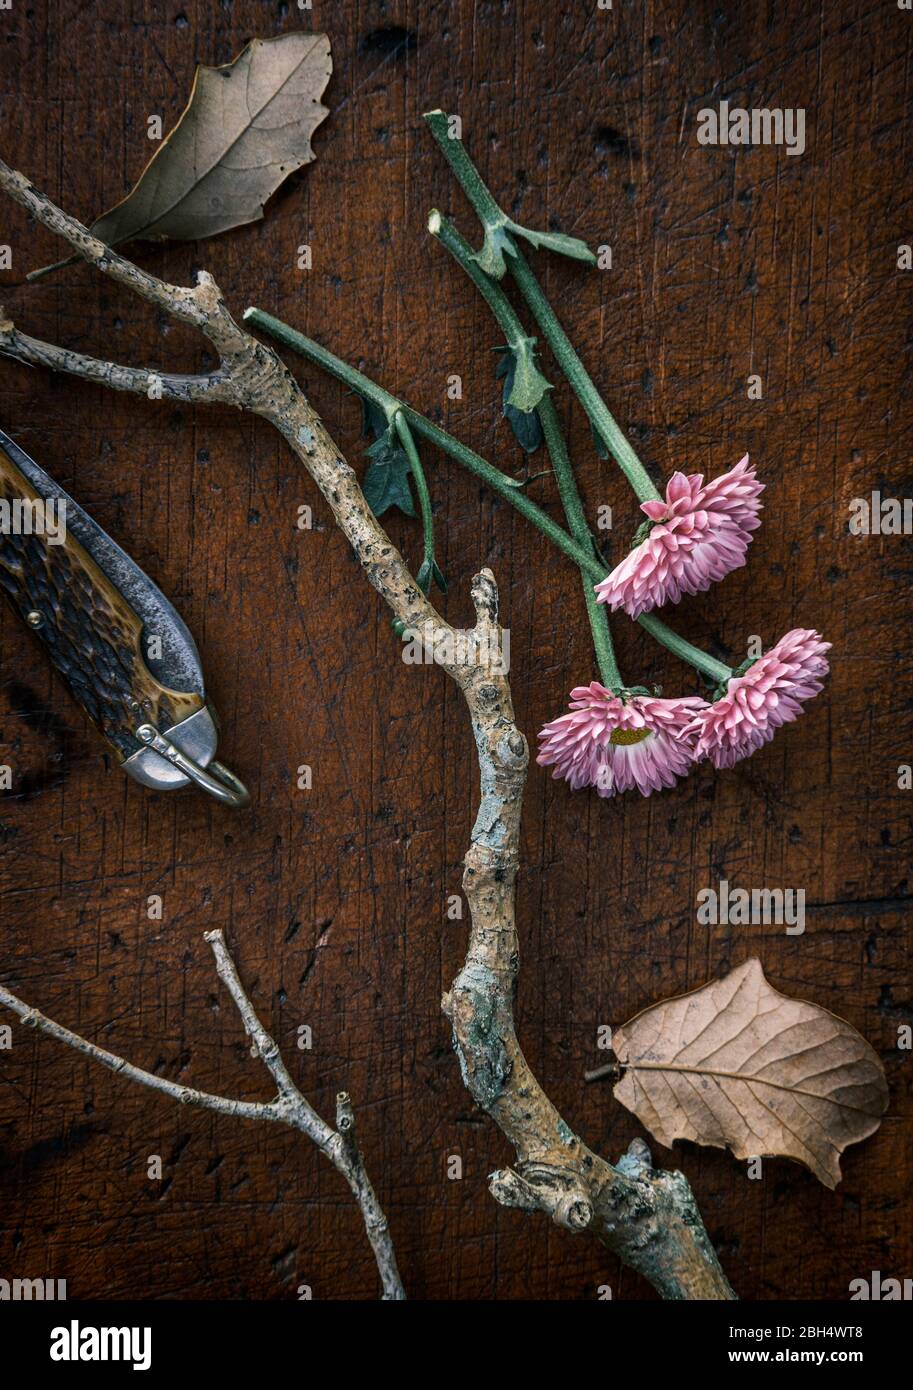 Pink flowers, pocket knife, branches and leaves Stock Photo